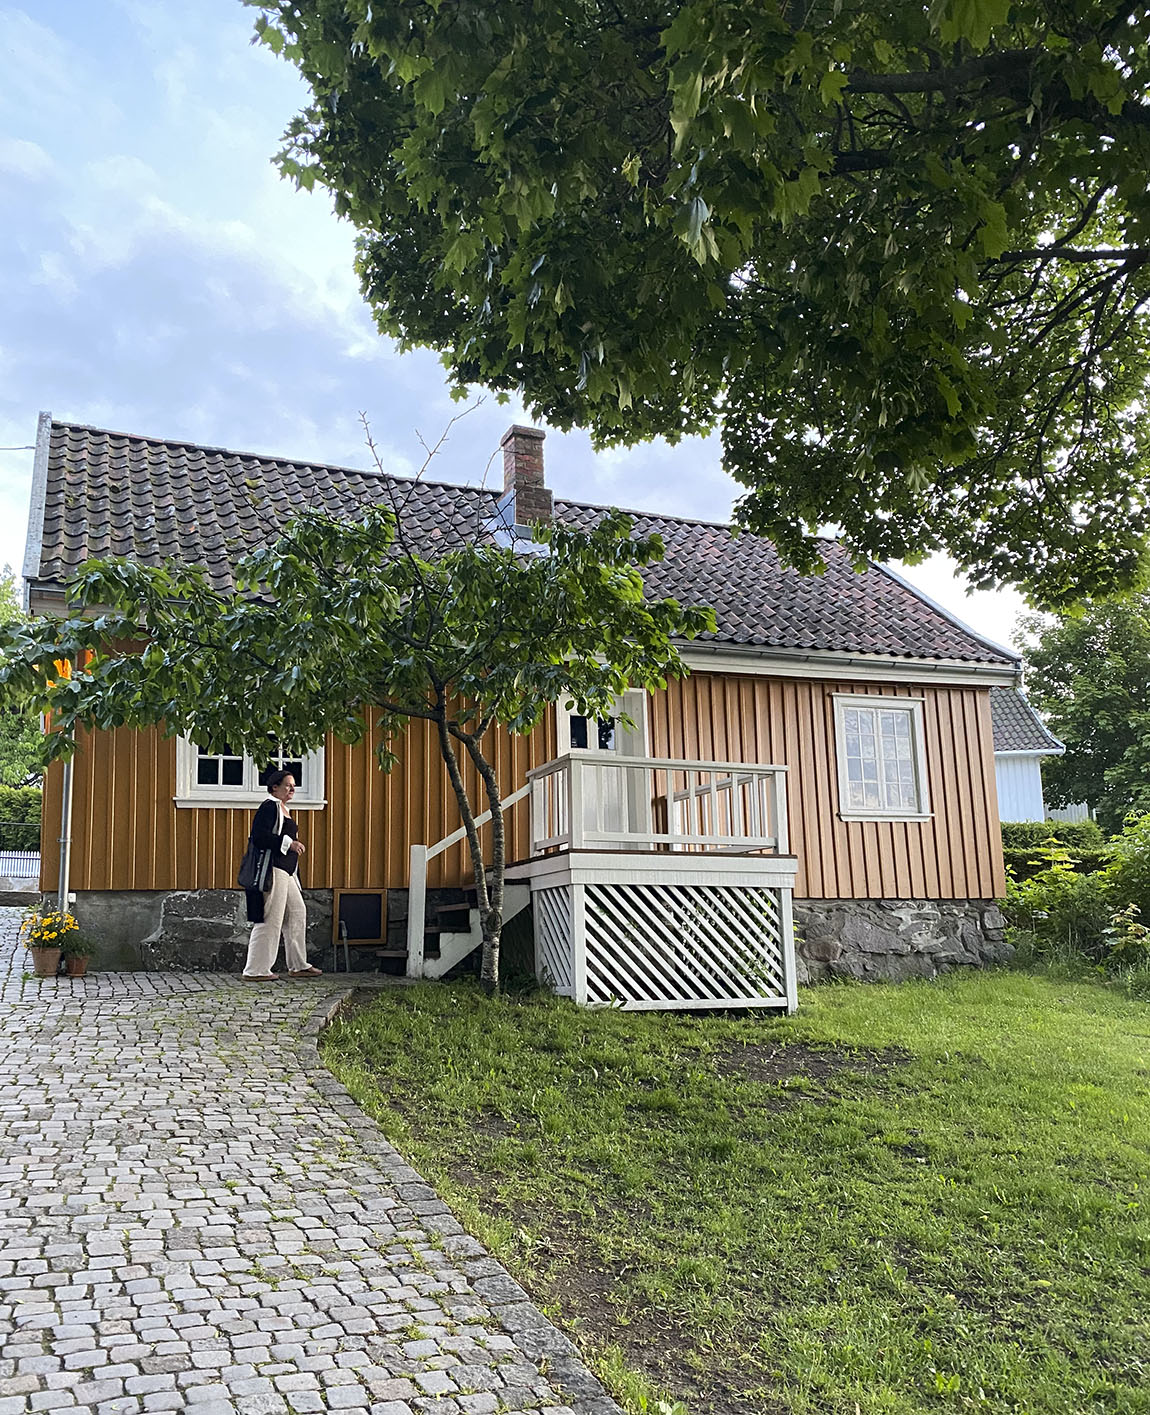 Travel back in time with The Vestfold Museums